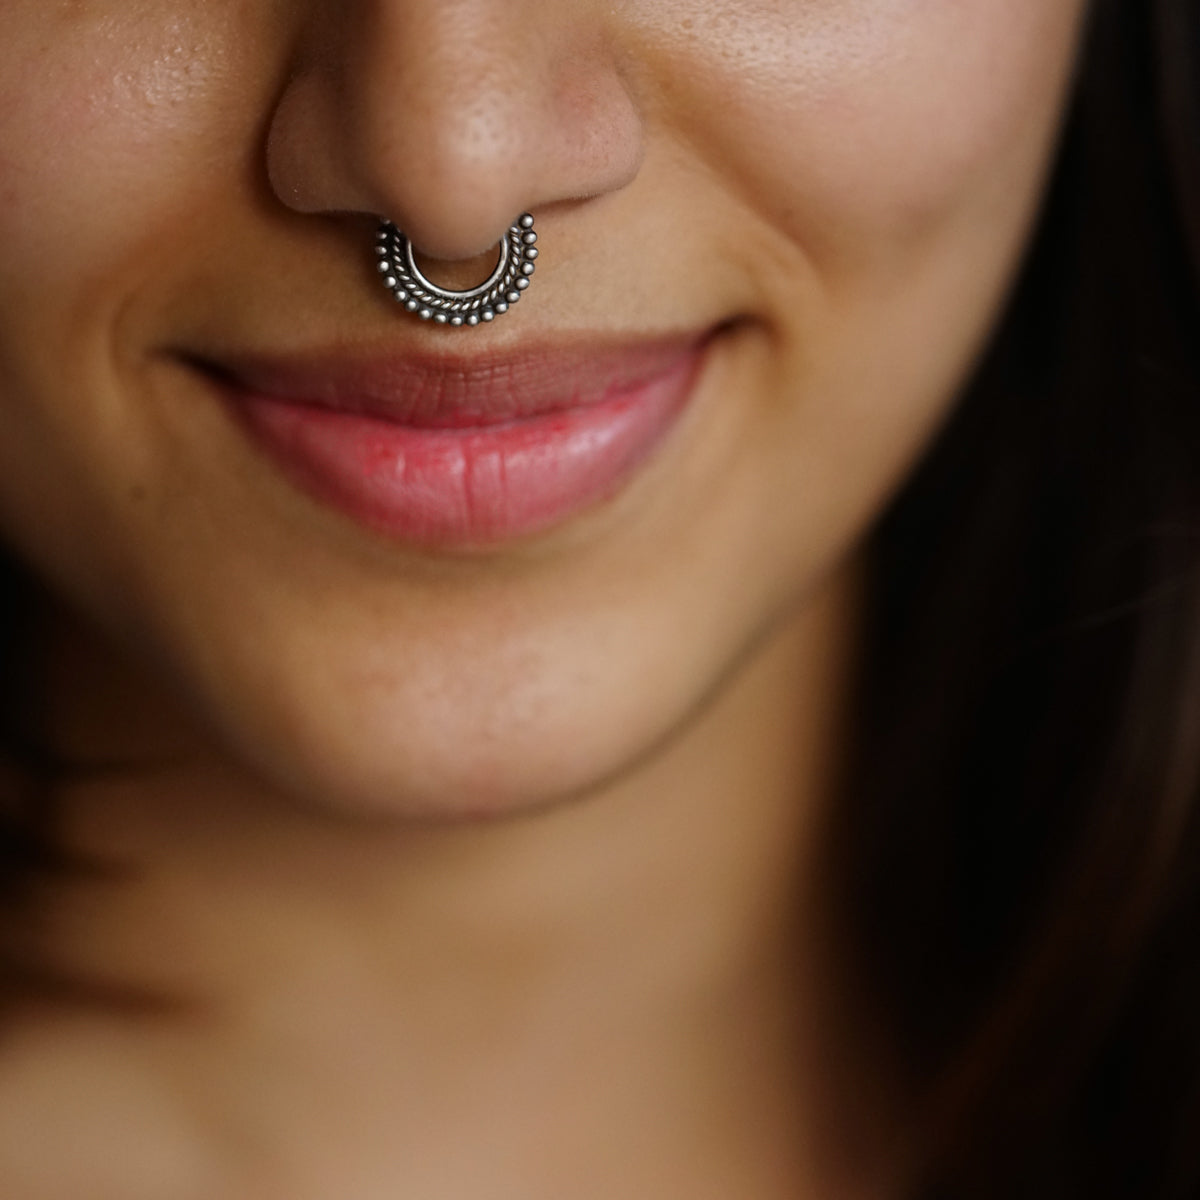 Amazon.com: Gold Plated Septum Ring, Unique Indian Style Nose Hoop Piercing,  fits Tragus, Cartilage, Helix, Rook, Nipple, Daith Earring,17g, Handmade  Jewelry : Handmade Products